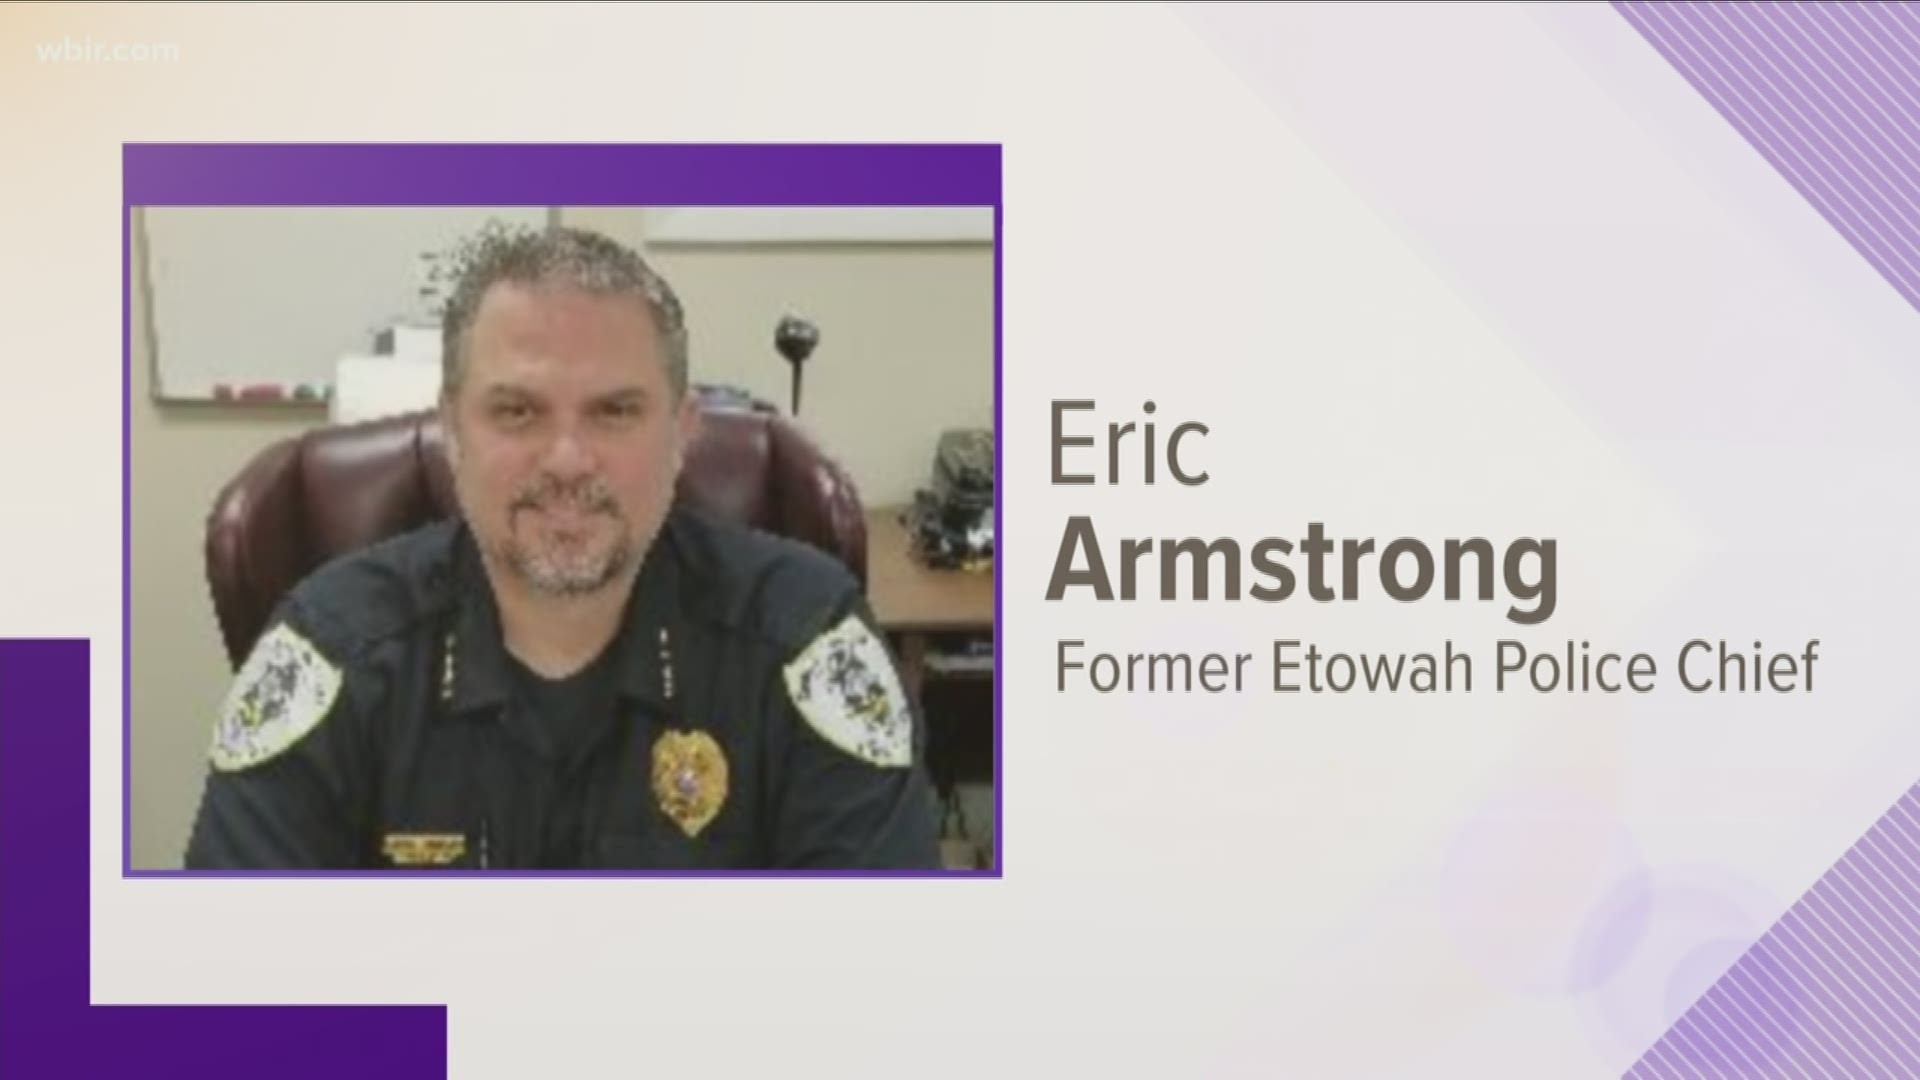 The former Etowah Chief of Police is nowhere to be found after he was fired for a domestic incident. His girlfriend said he caused several facial injuries.